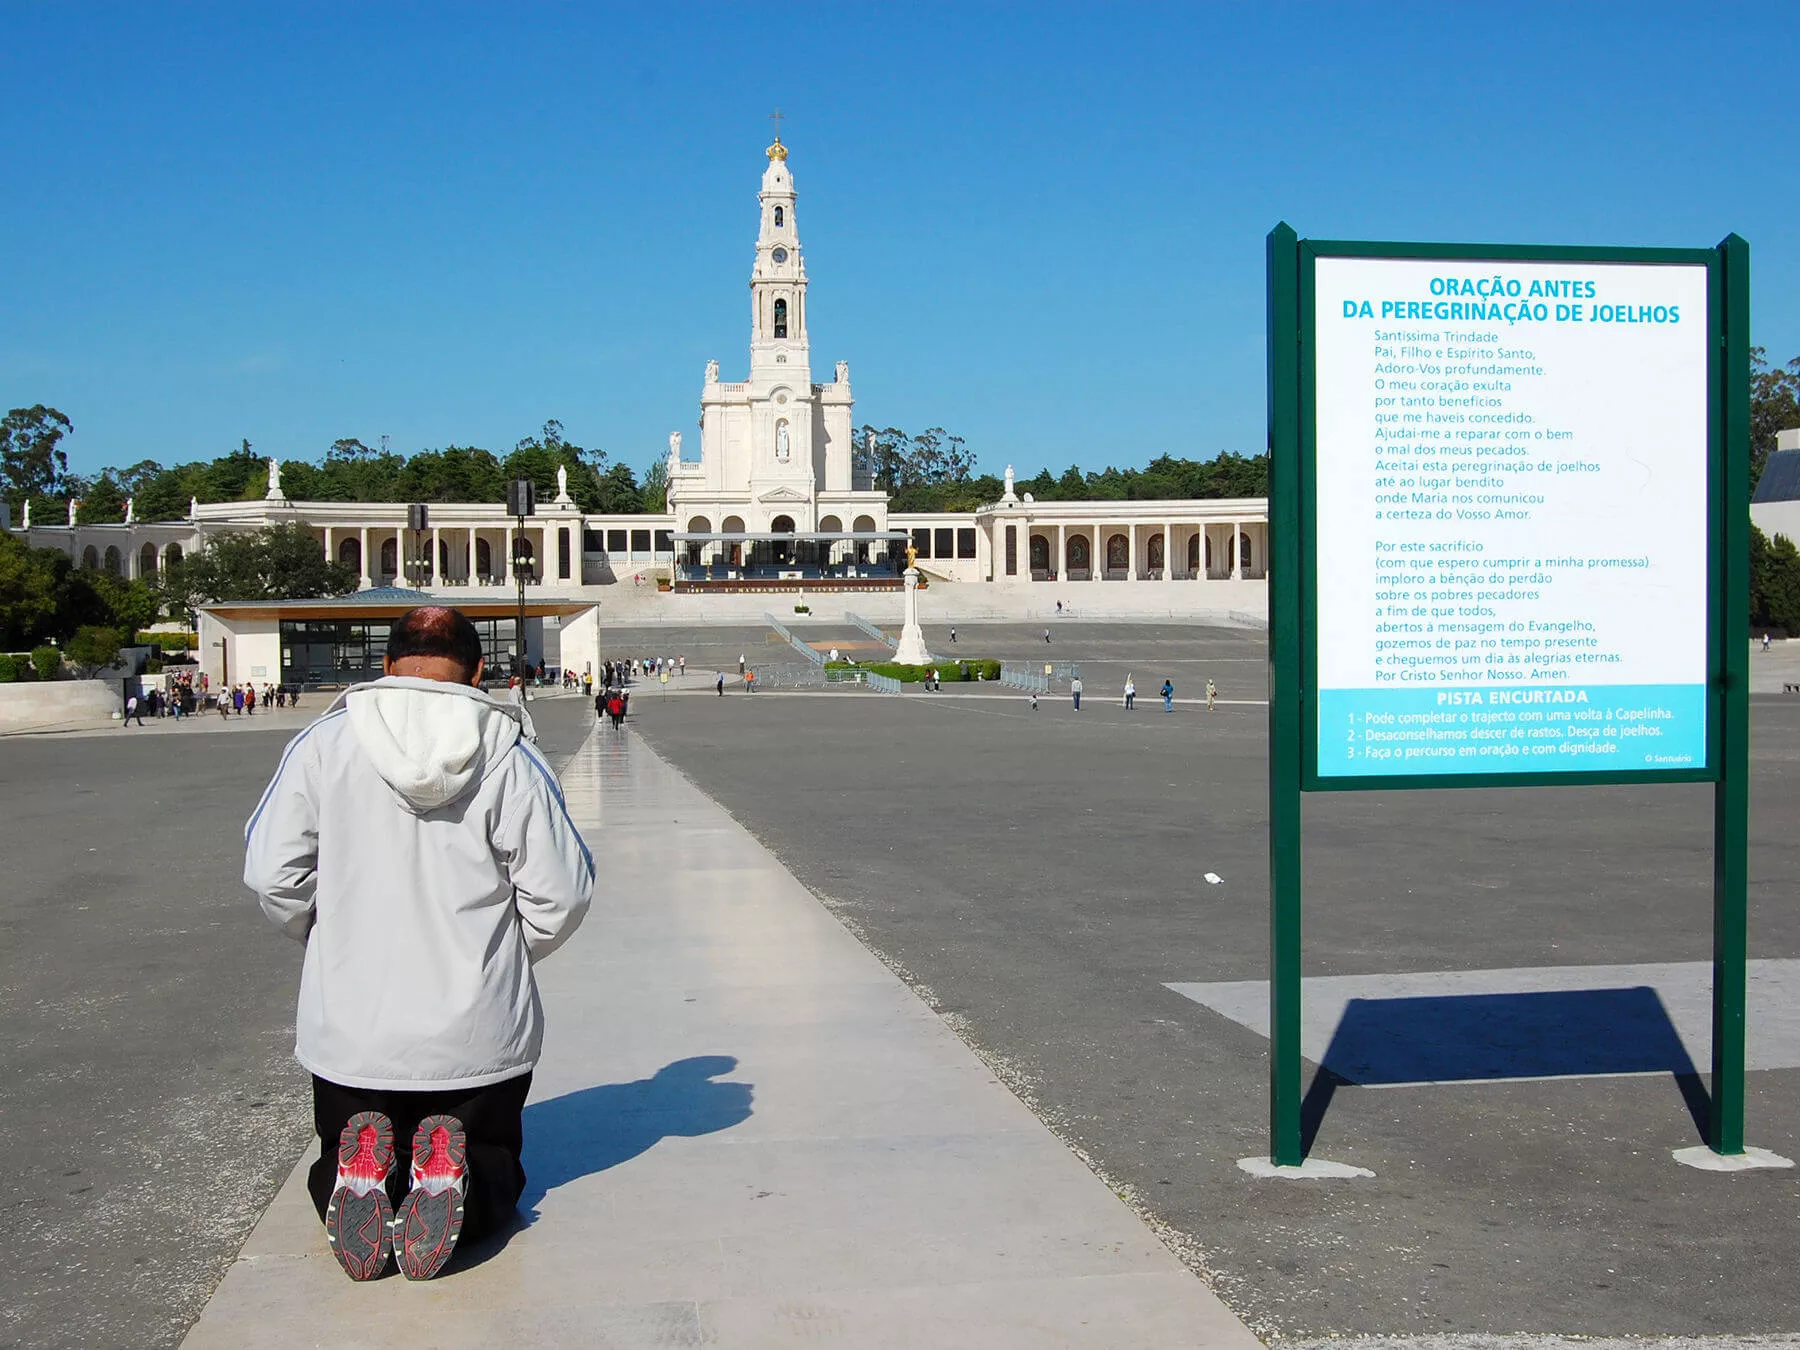 John Paul II had a special place in his heart for the Portuguese pilgrimage town of Fátima